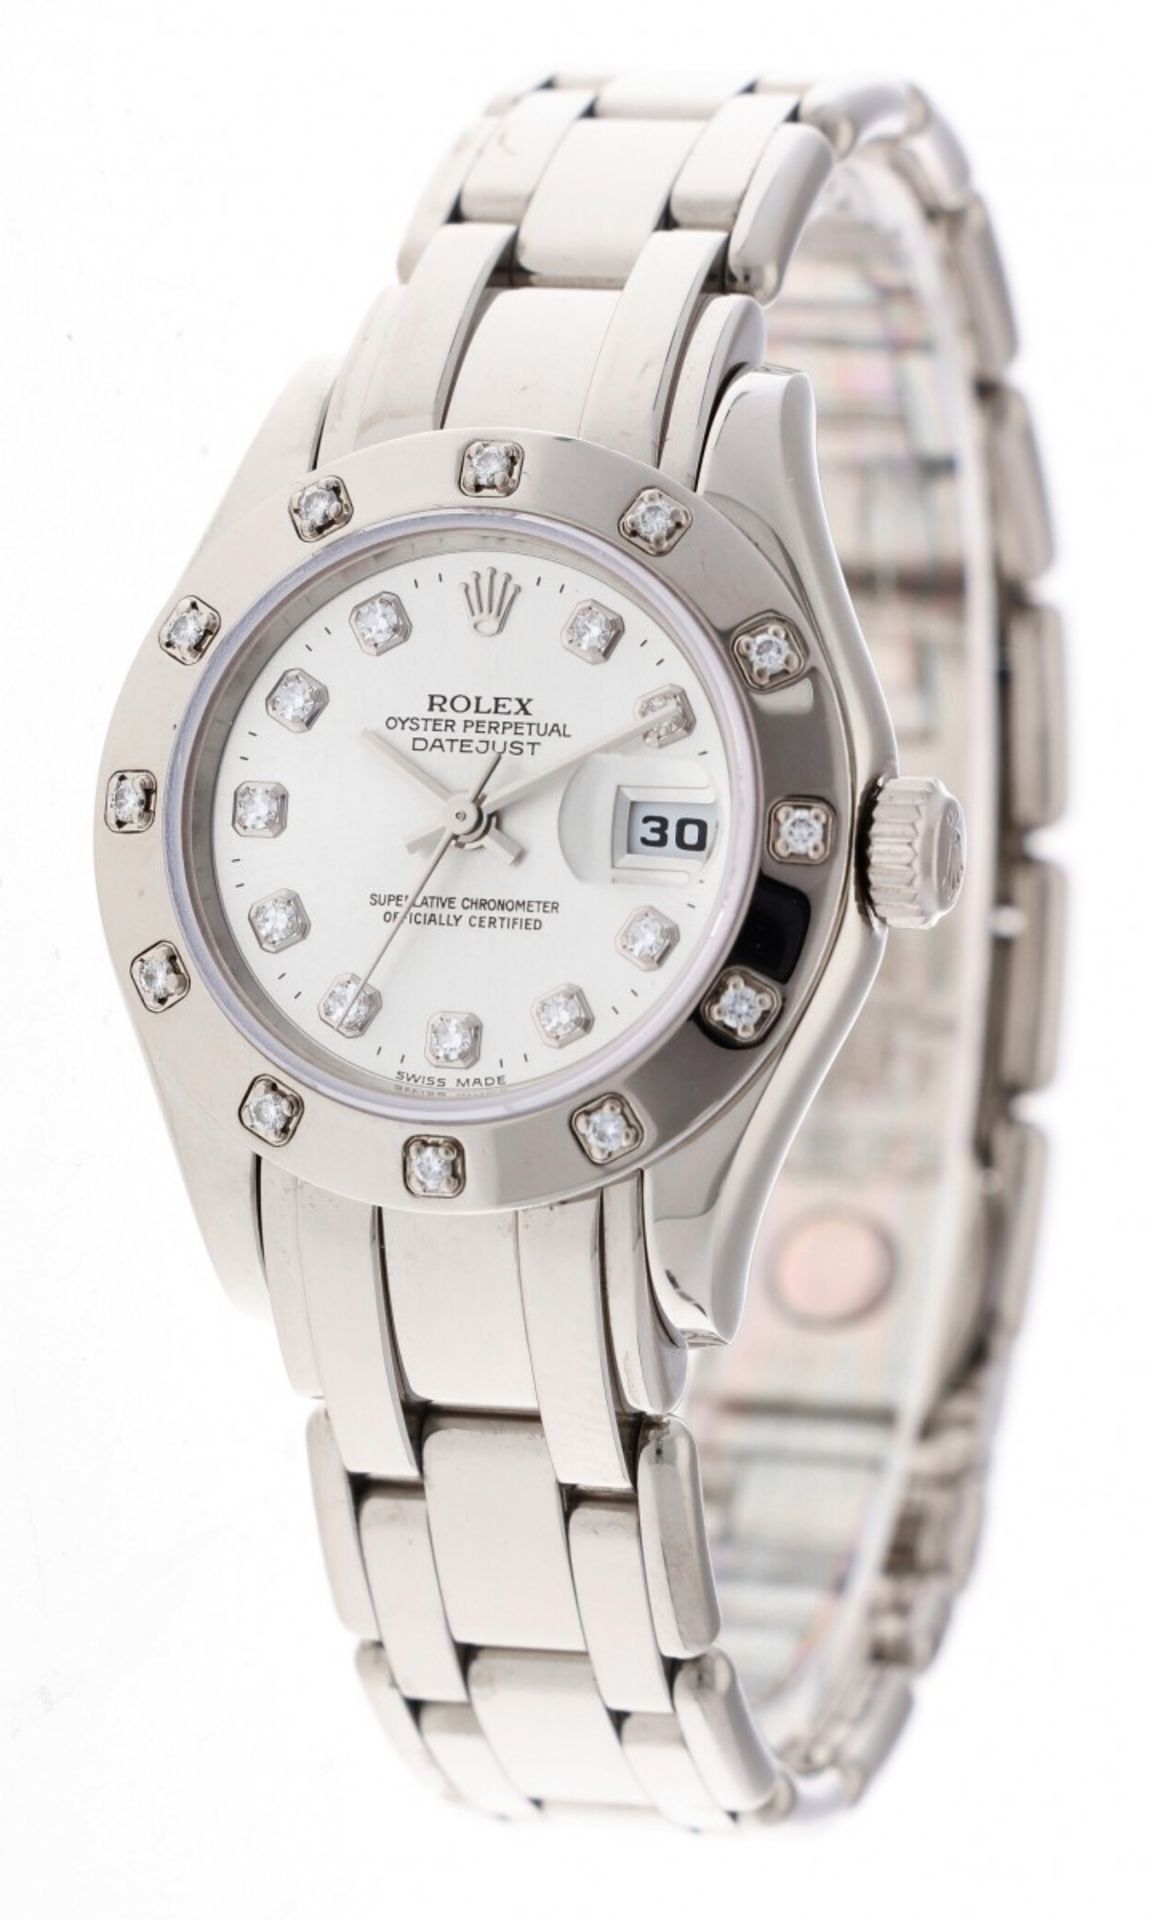 Rolex Pearlmaster 80319 - Ladies watch - ca. 2000 - Image 2 of 6